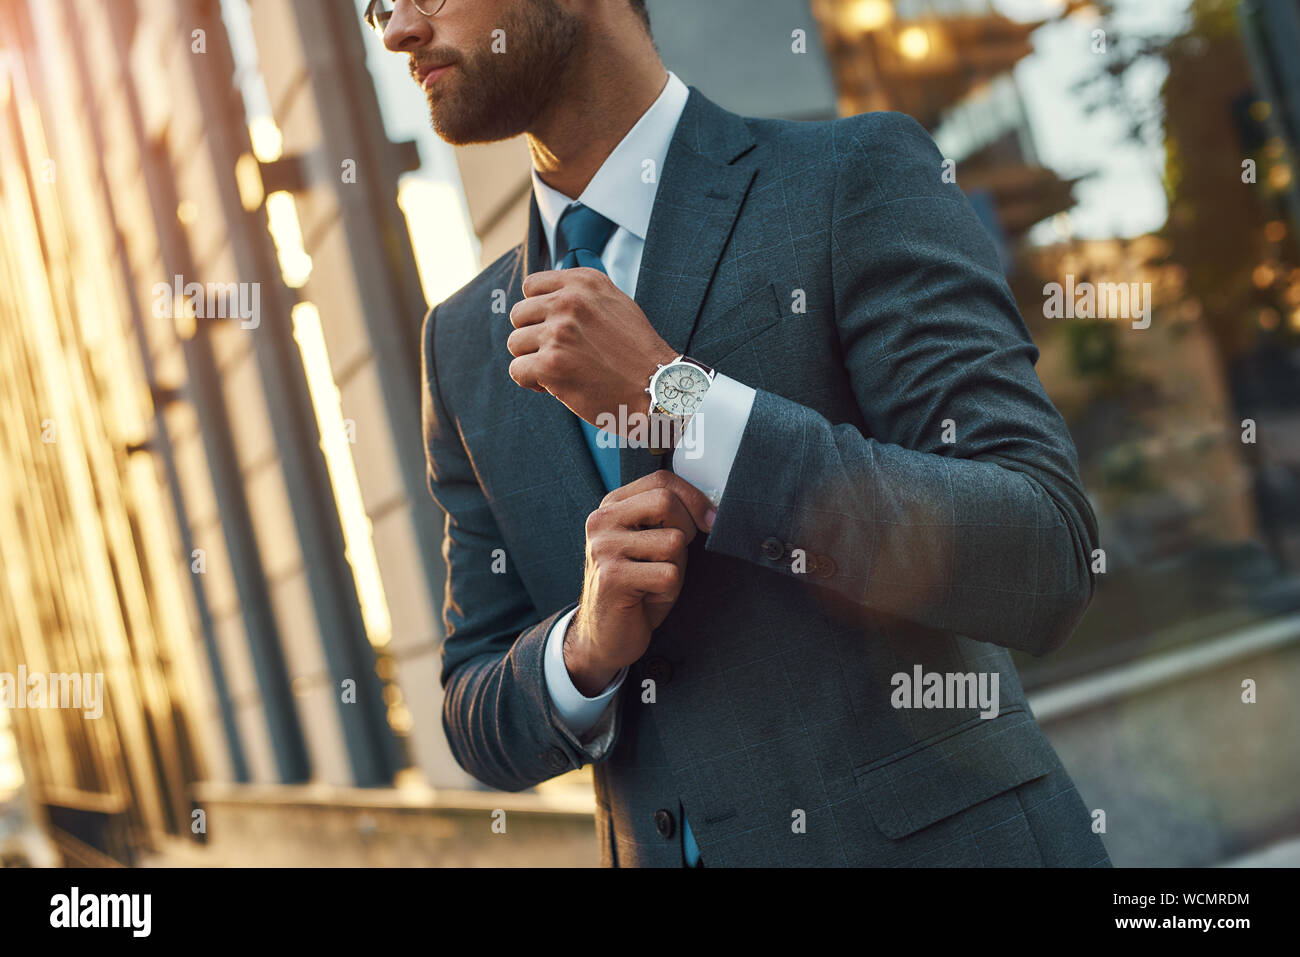 Stylish man. Confident businessman in full suit adjusting his sleeve while standing outdoors. Business concept. Stylish people Stock Photo